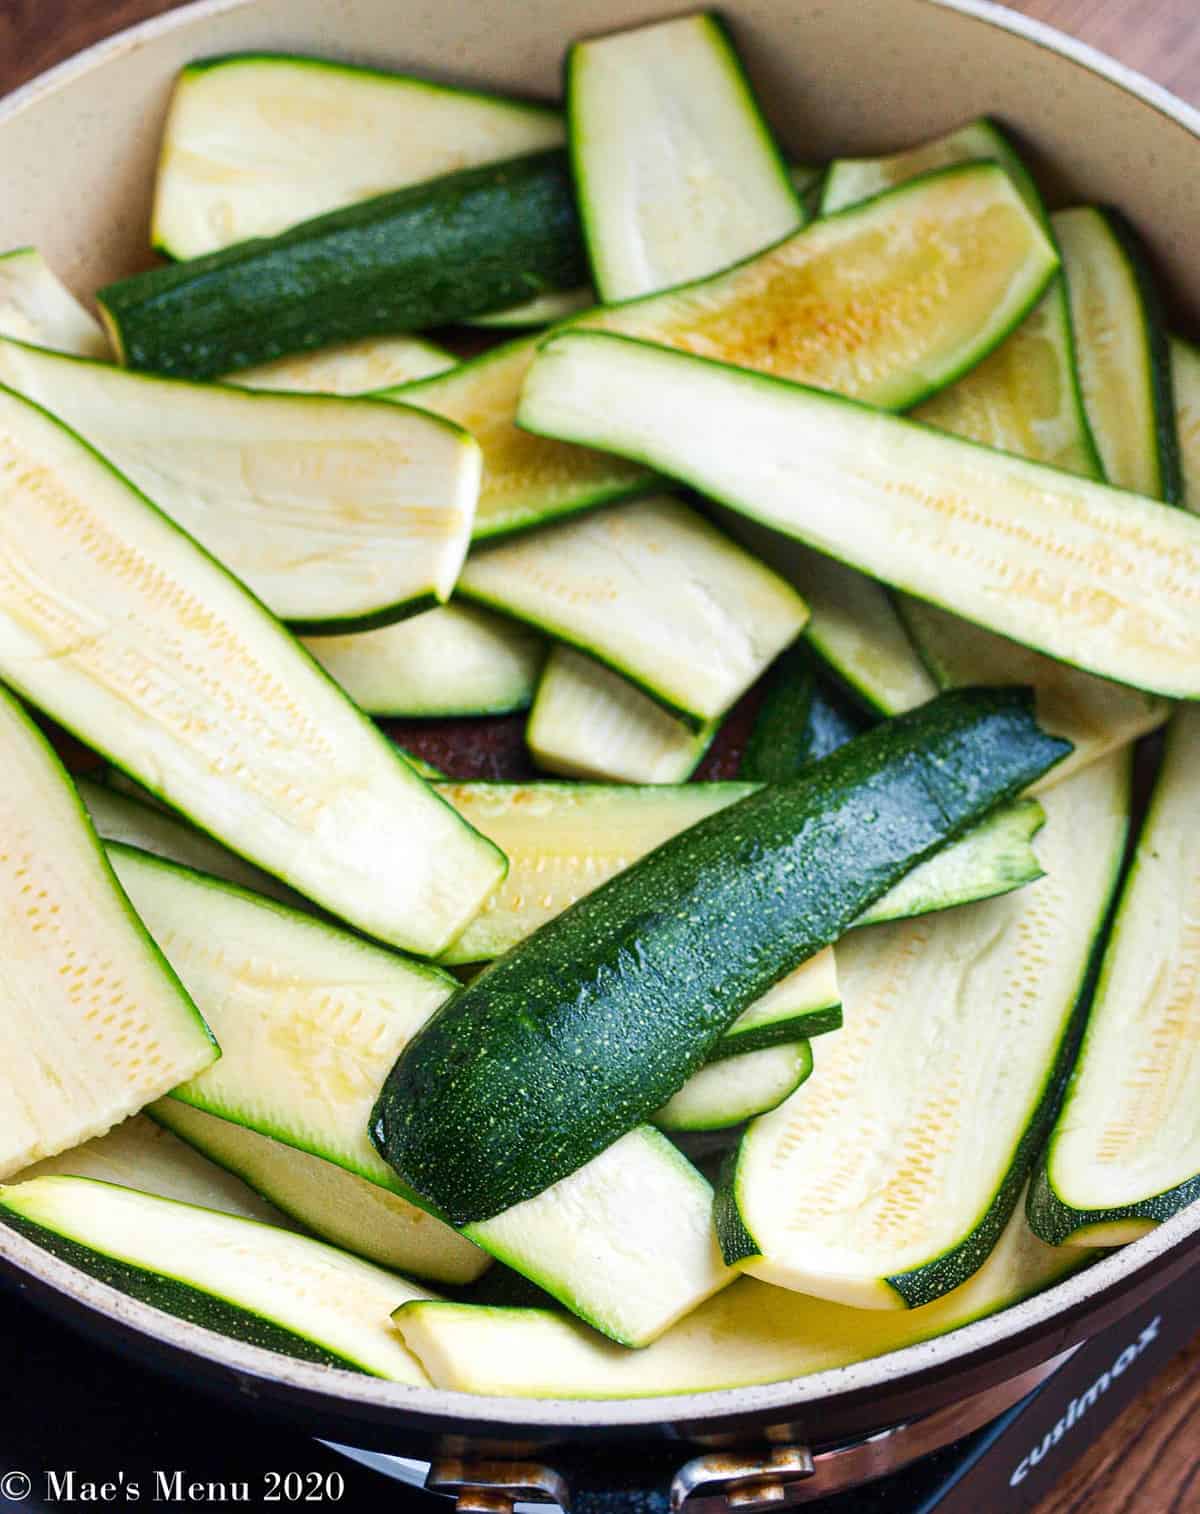 A saute pan full of zucchini slices cooking up